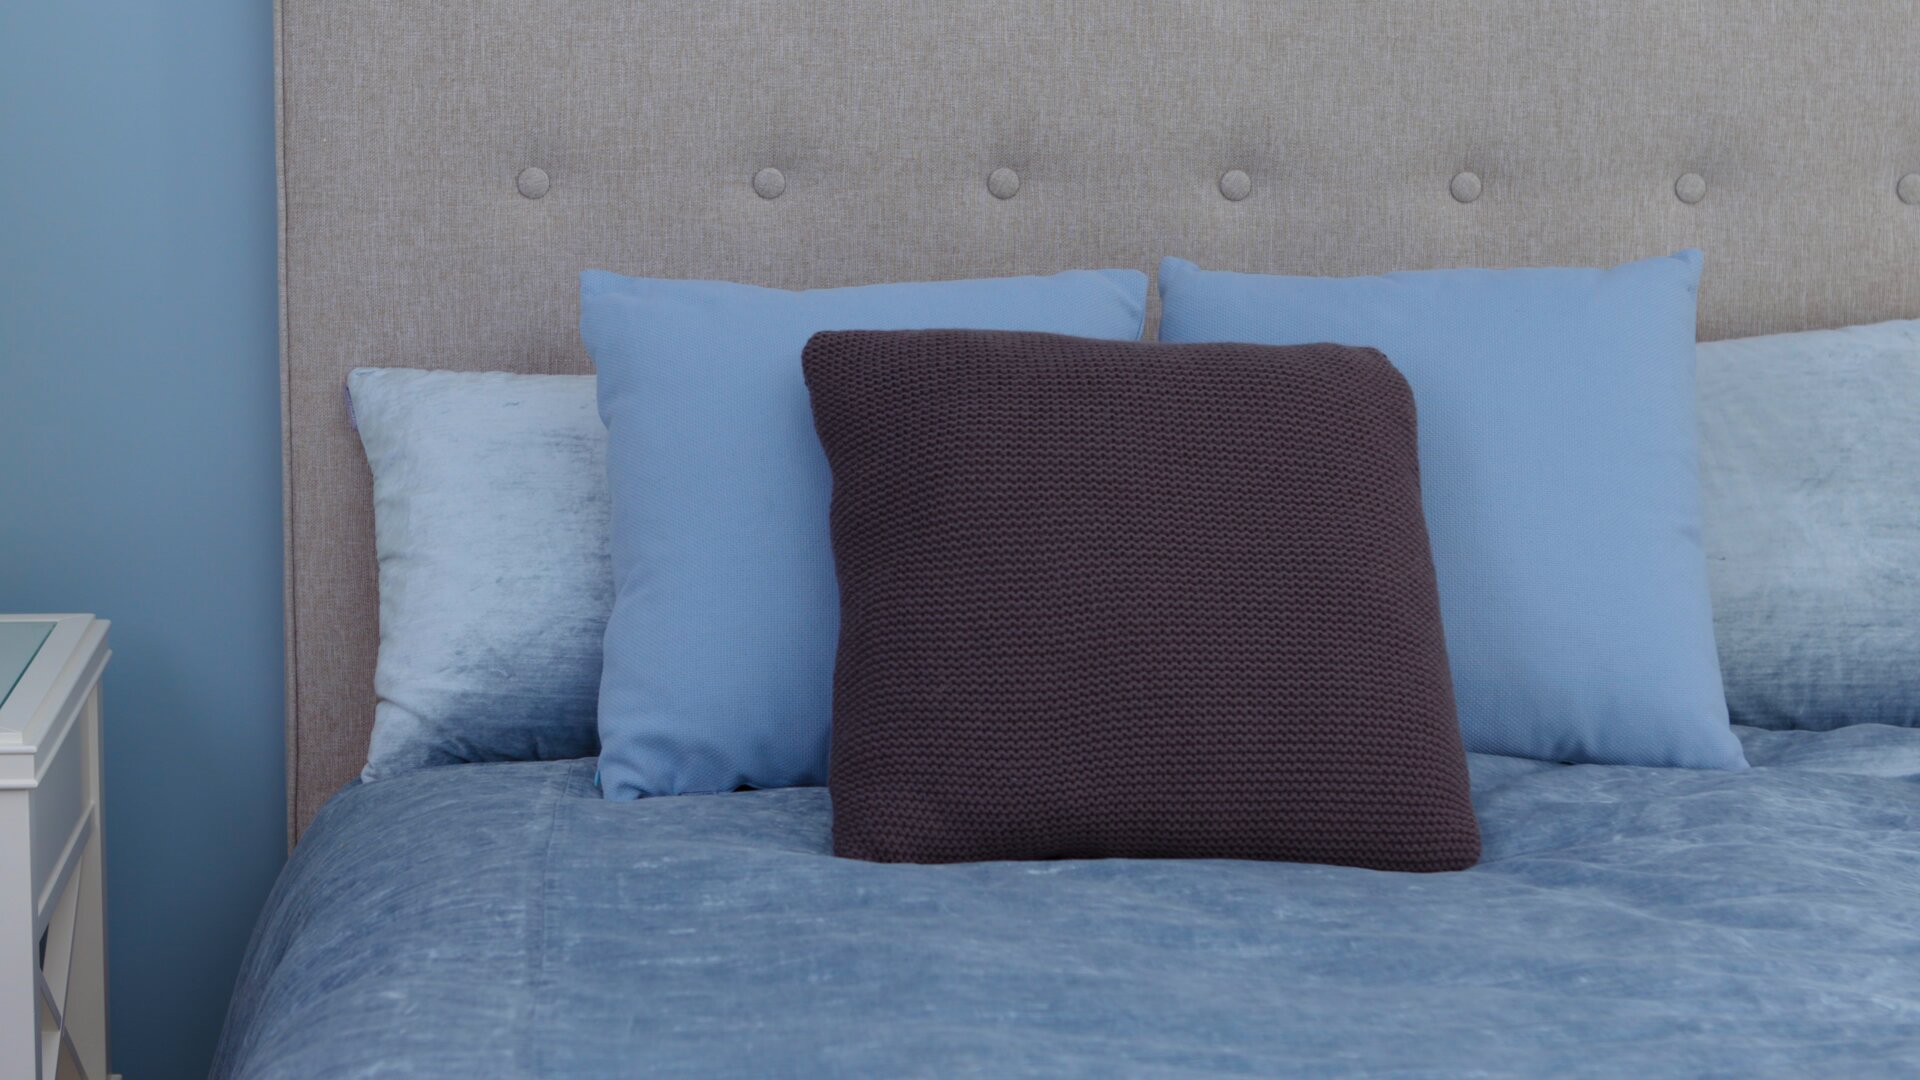 Matching Cushions To Your Bedding & Living Area